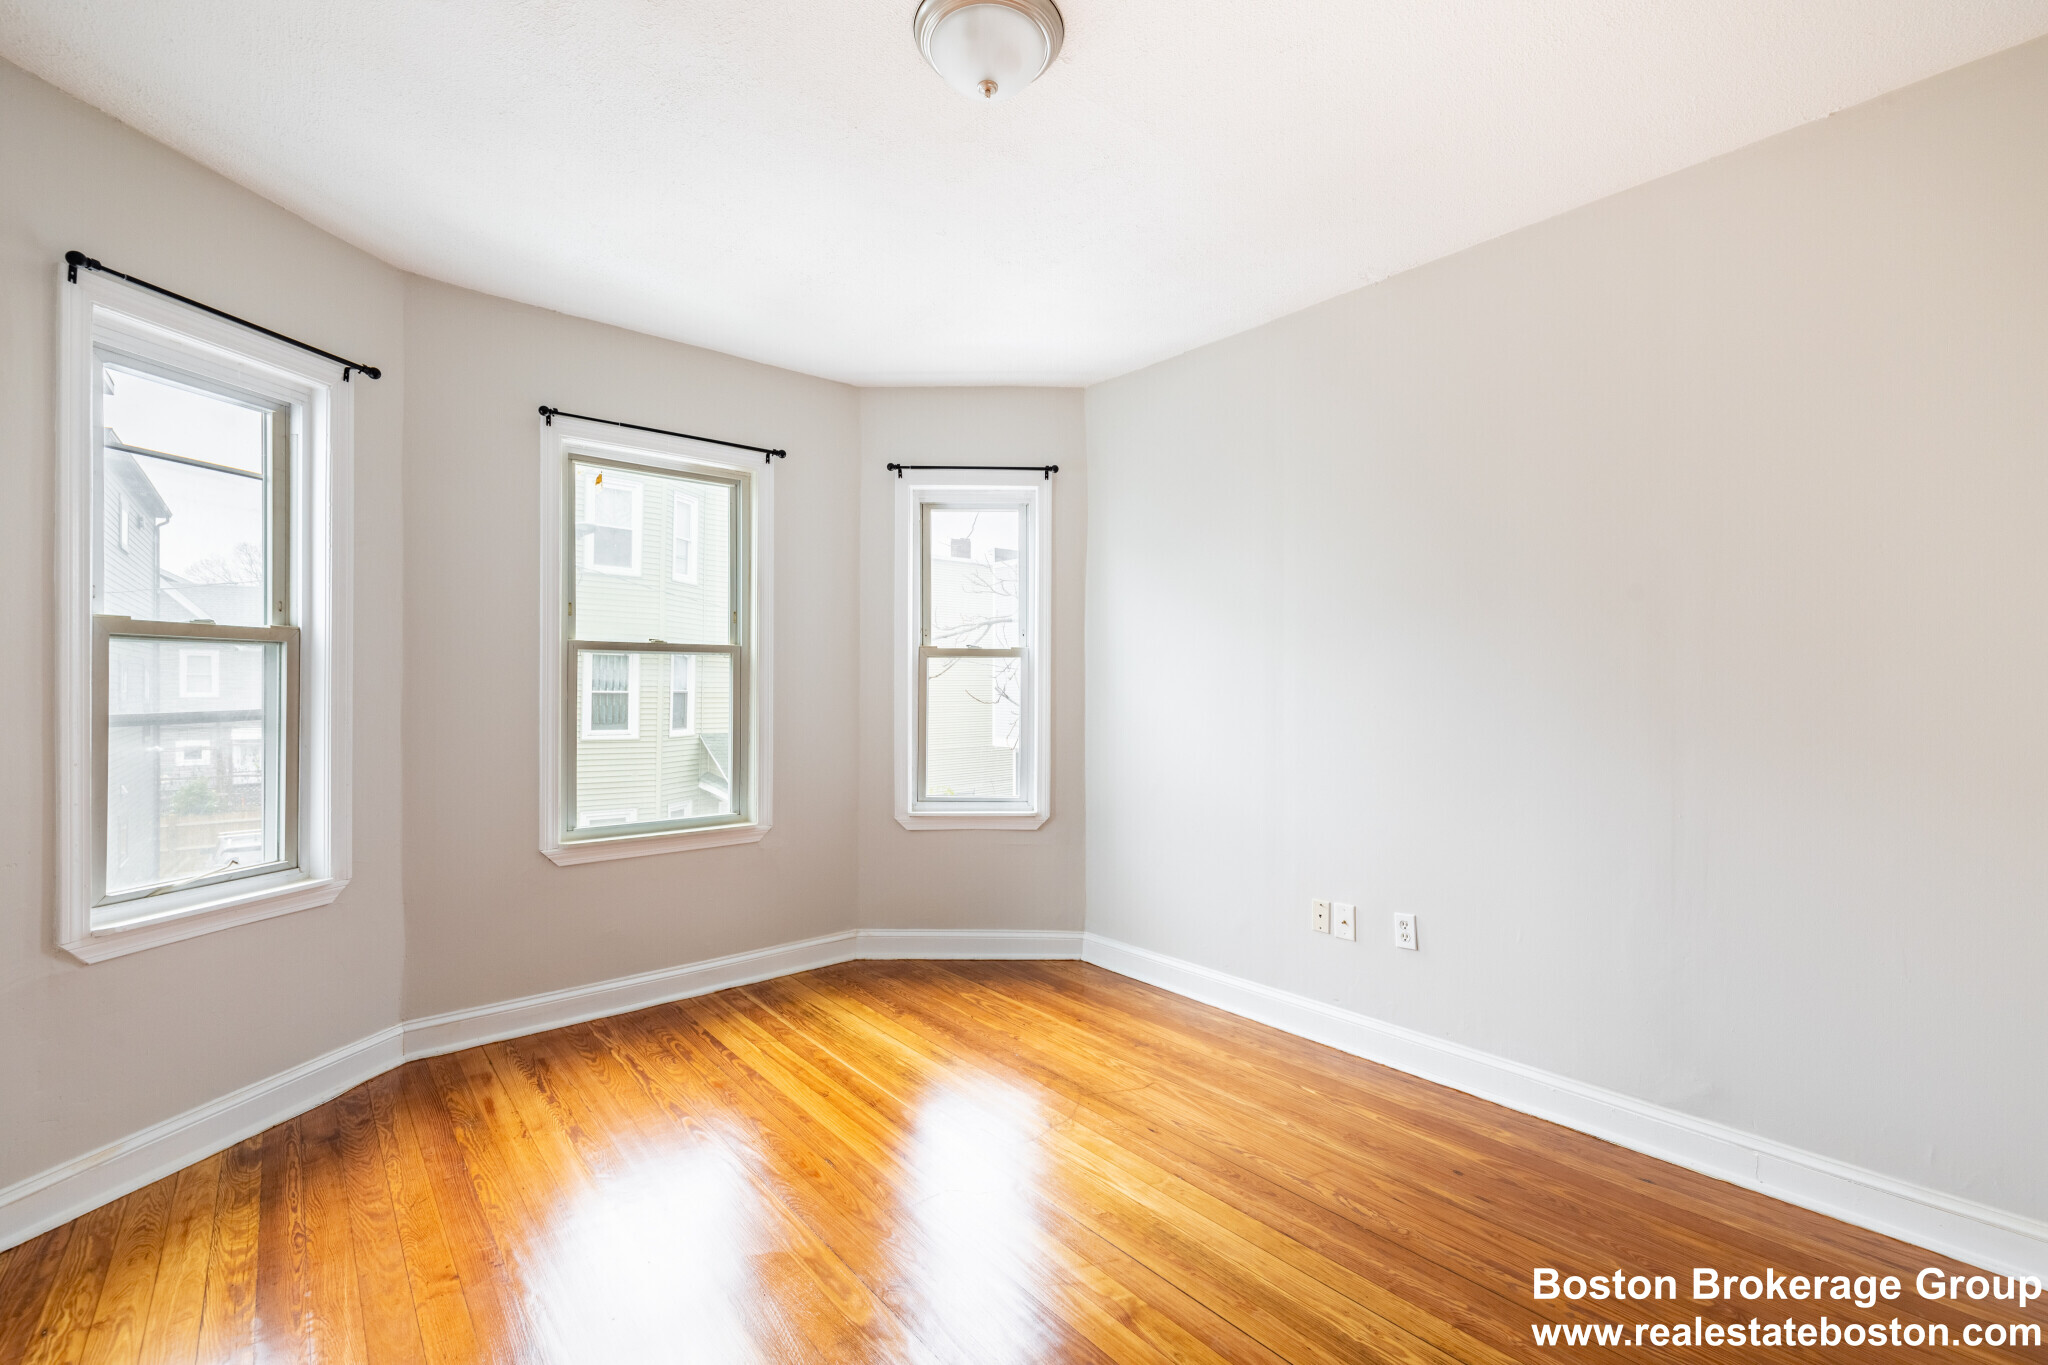 Photos of apartment on Cawfield St.,Boston MA 02125